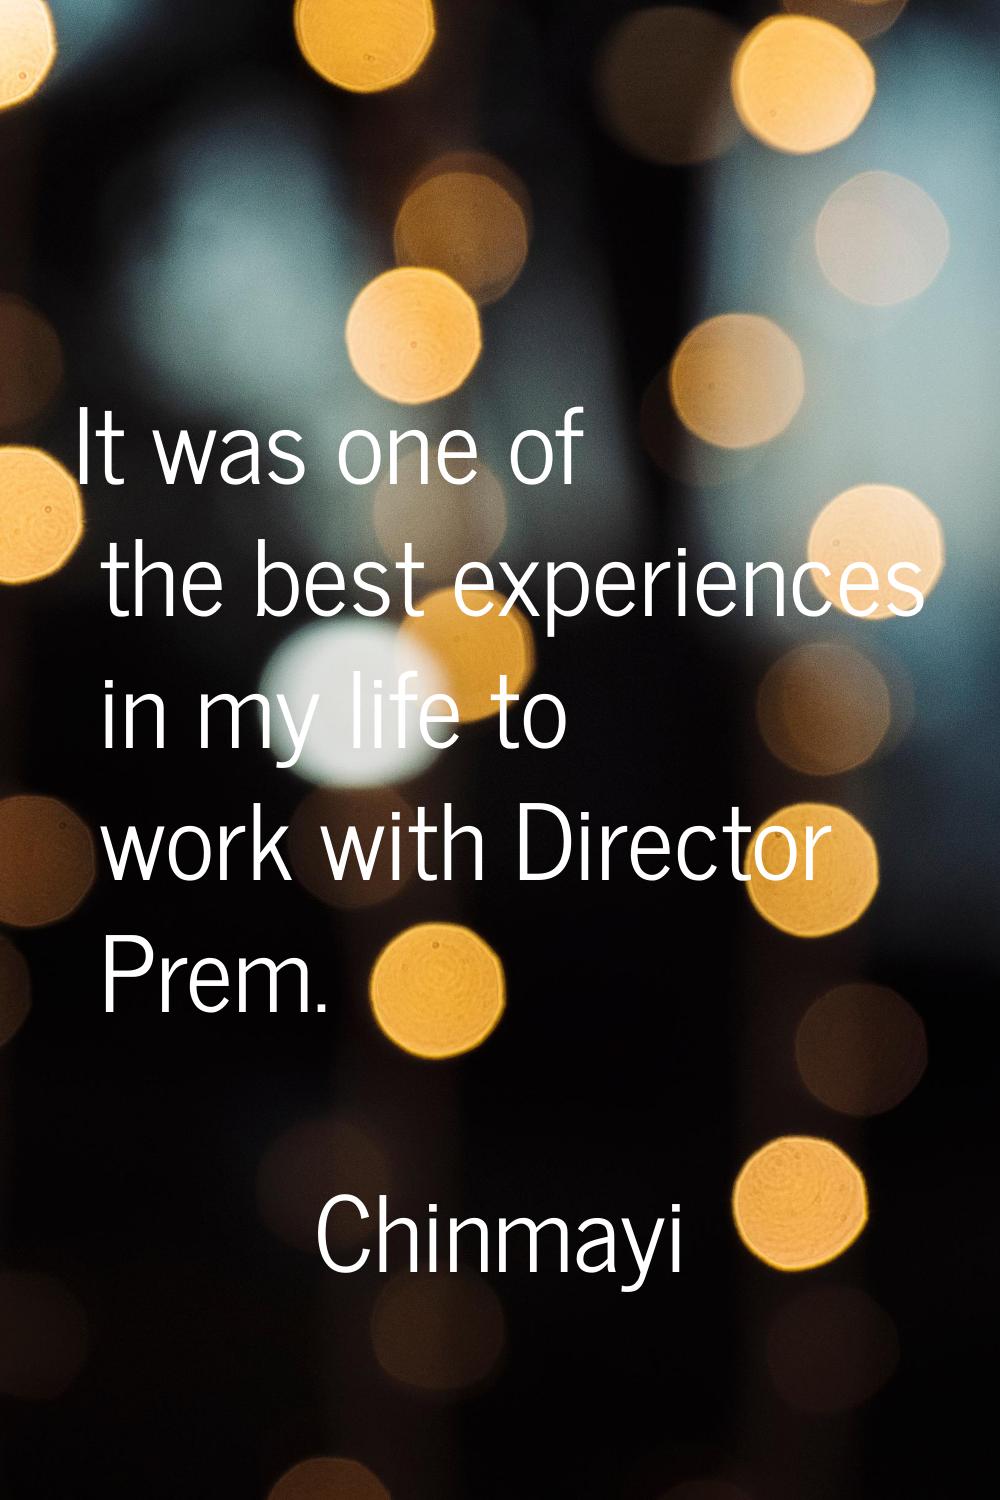 It was one of the best experiences in my life to work with Director Prem.